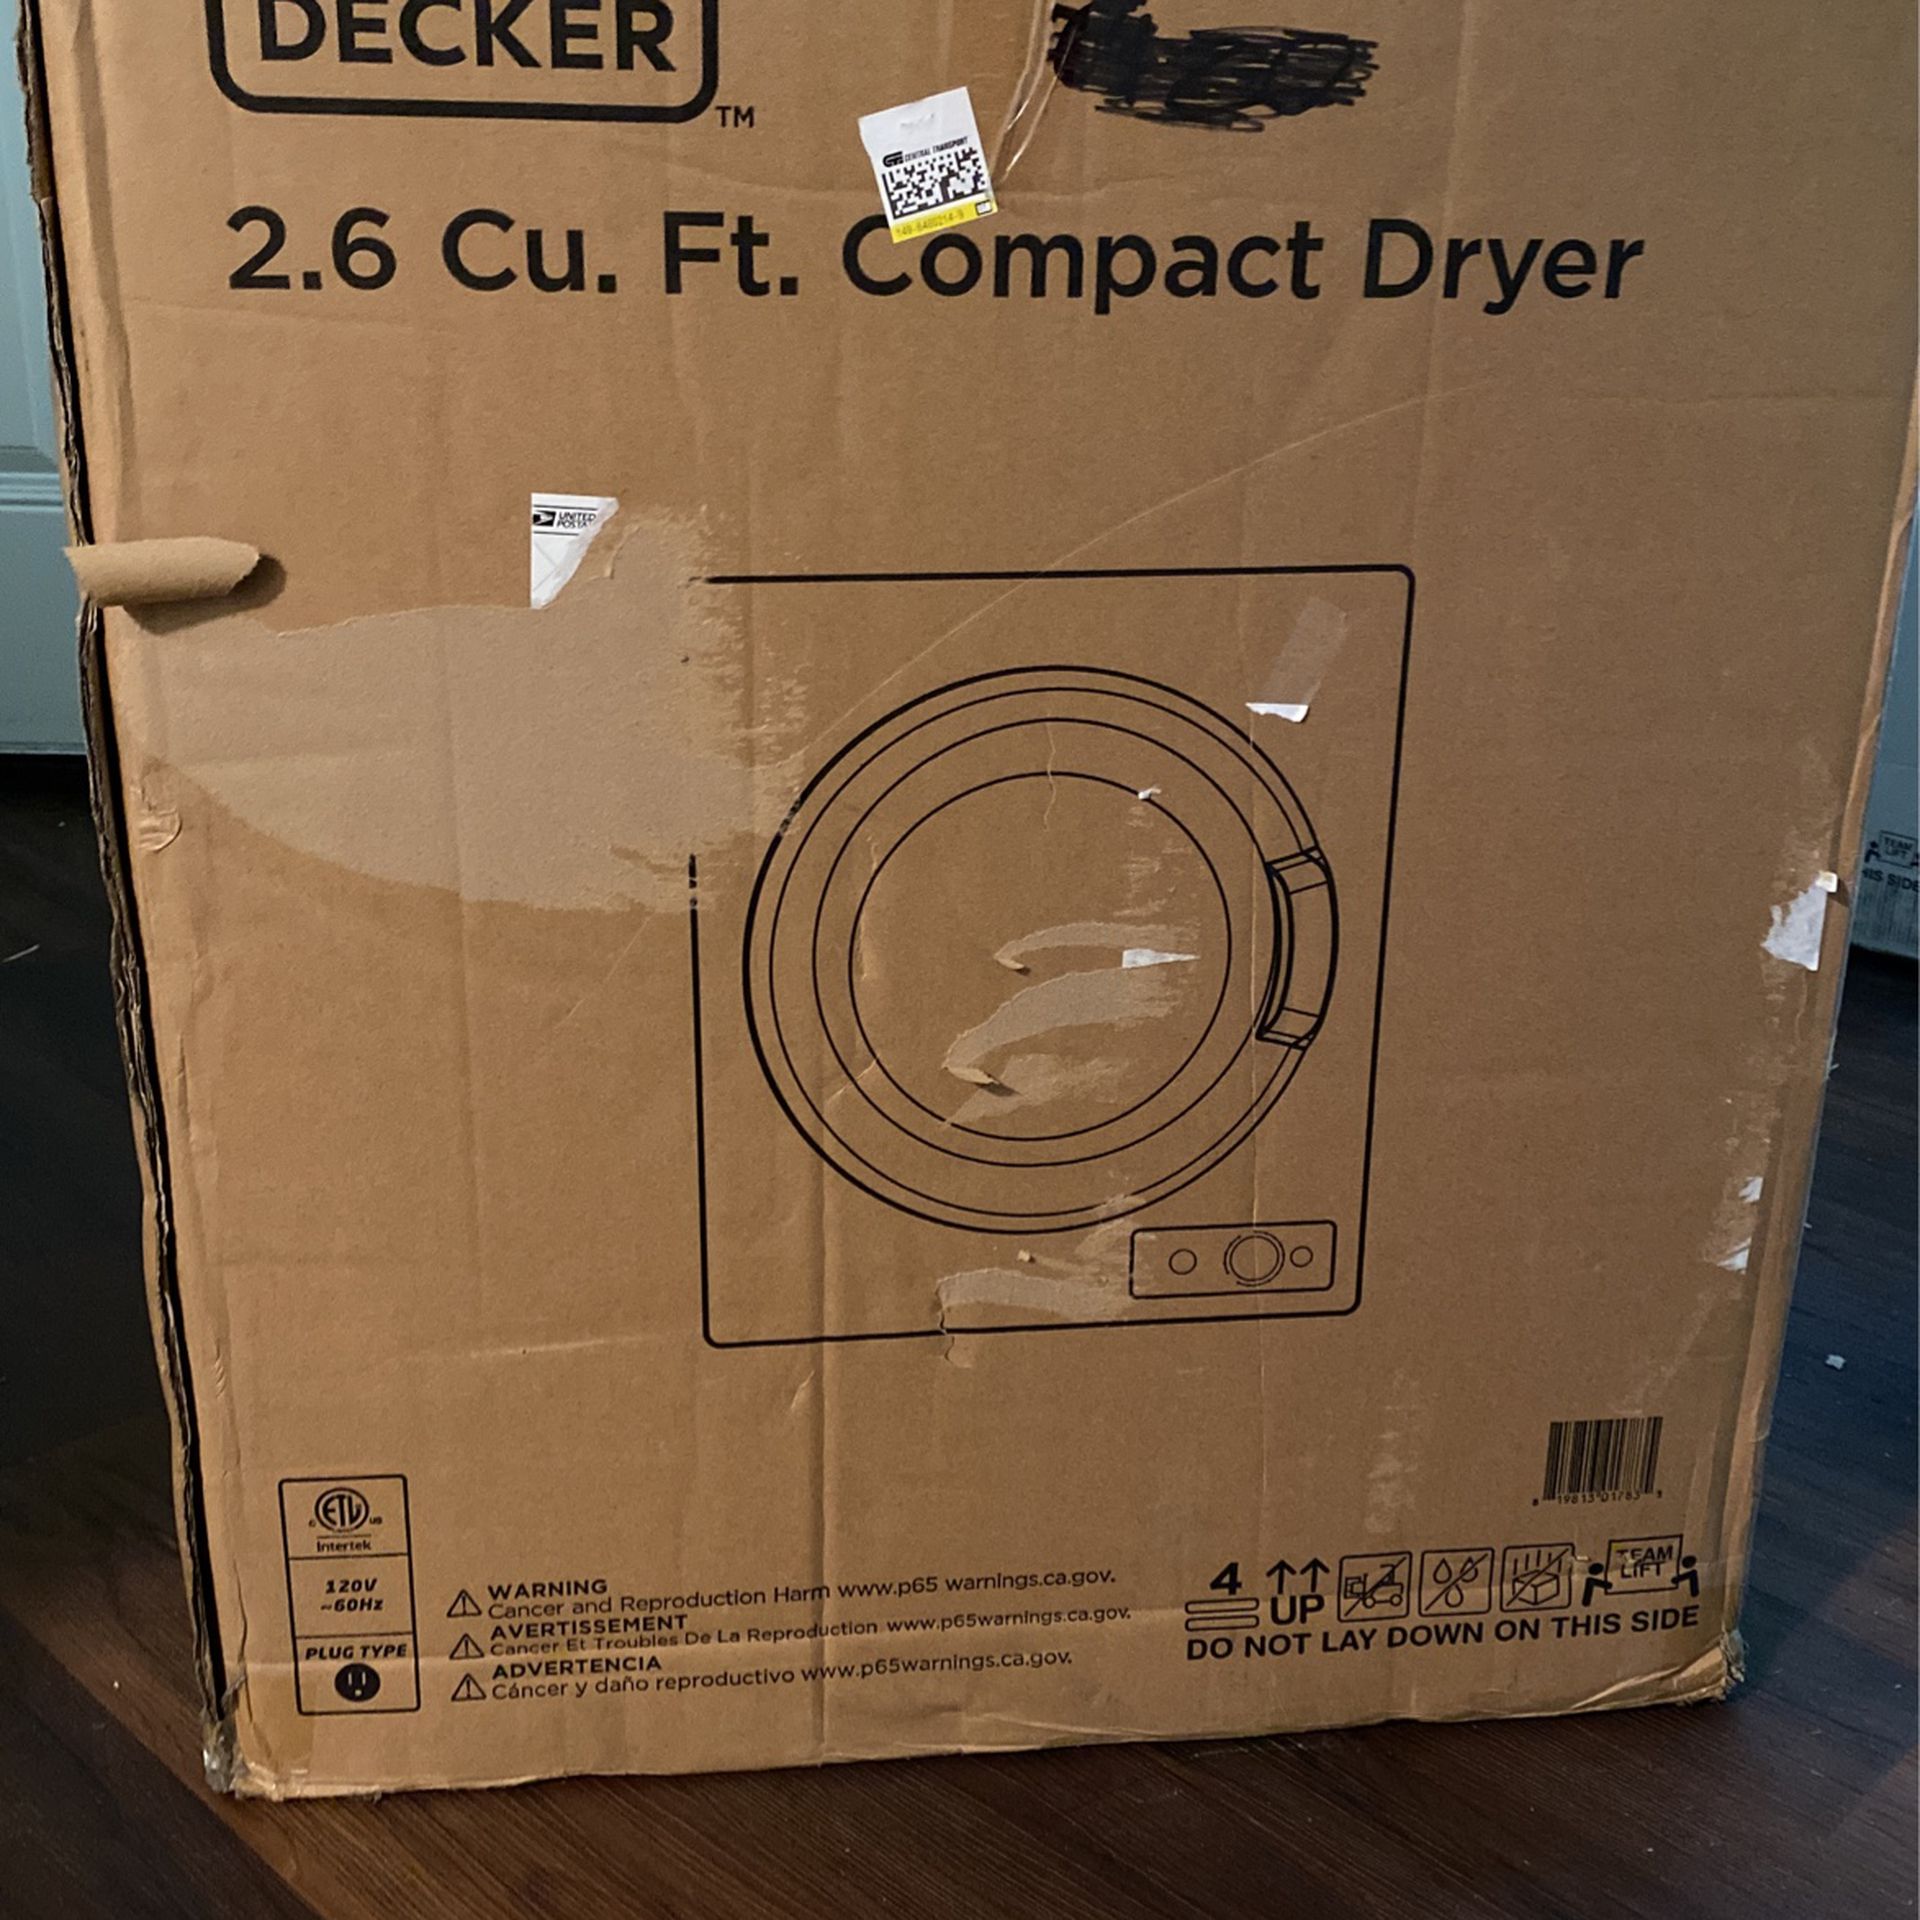 BLACK+DECKER BCED26 Portable Dryer, Small, 4 Modes, Load Volume 8.8 lbs.,  White for Sale in Houston, TX - OfferUp